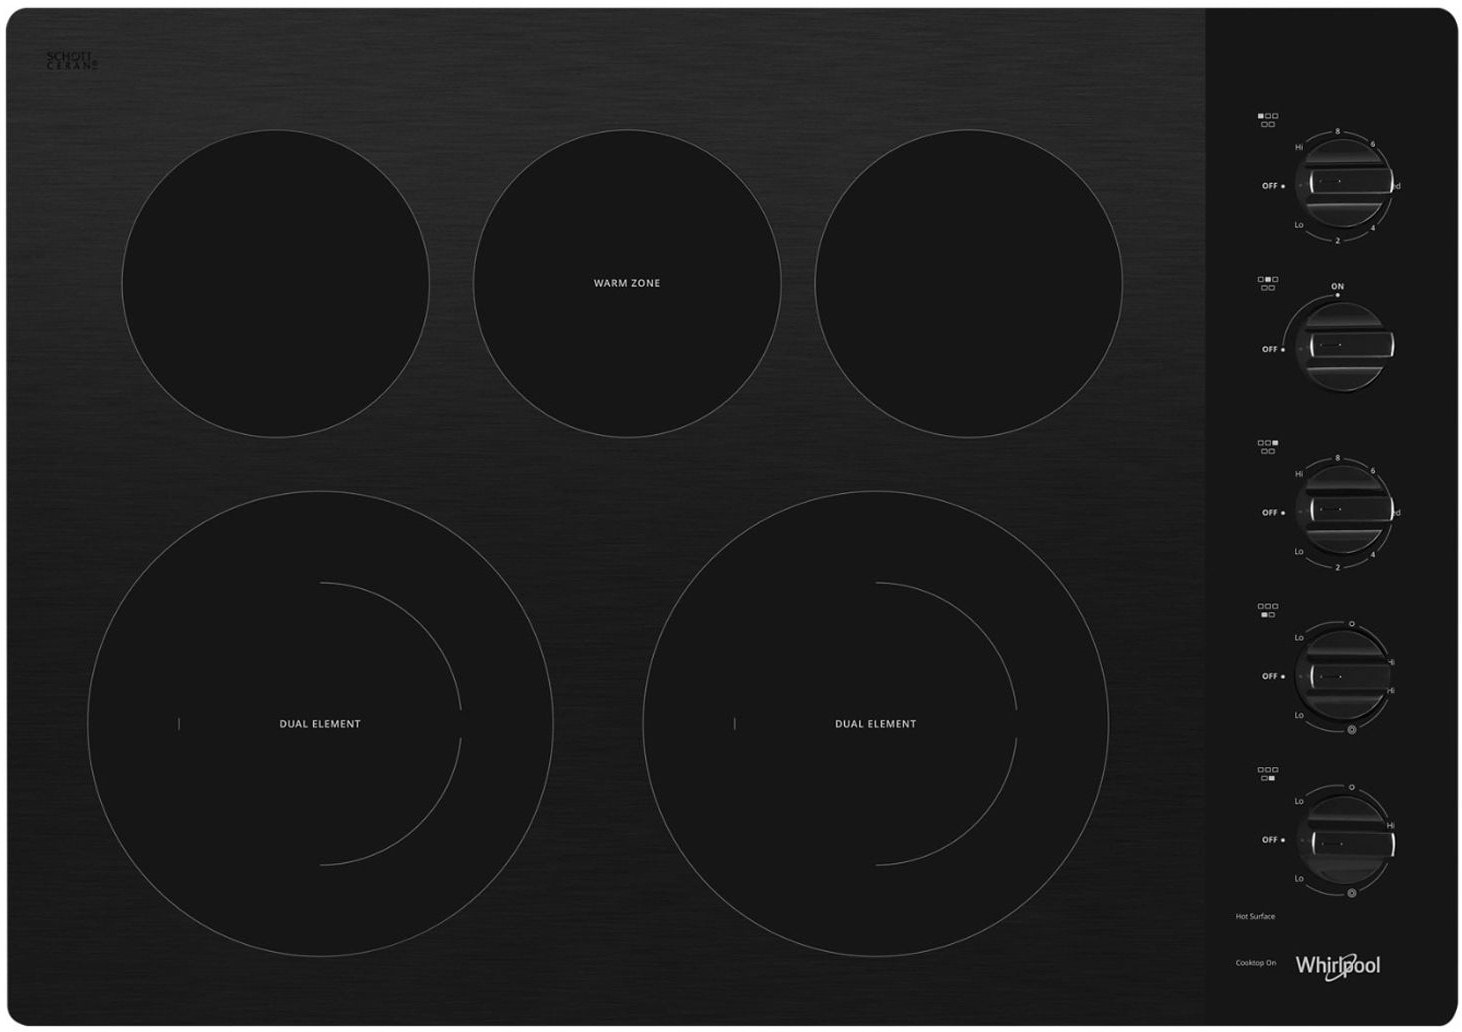 30 Inch Electric Cooktop